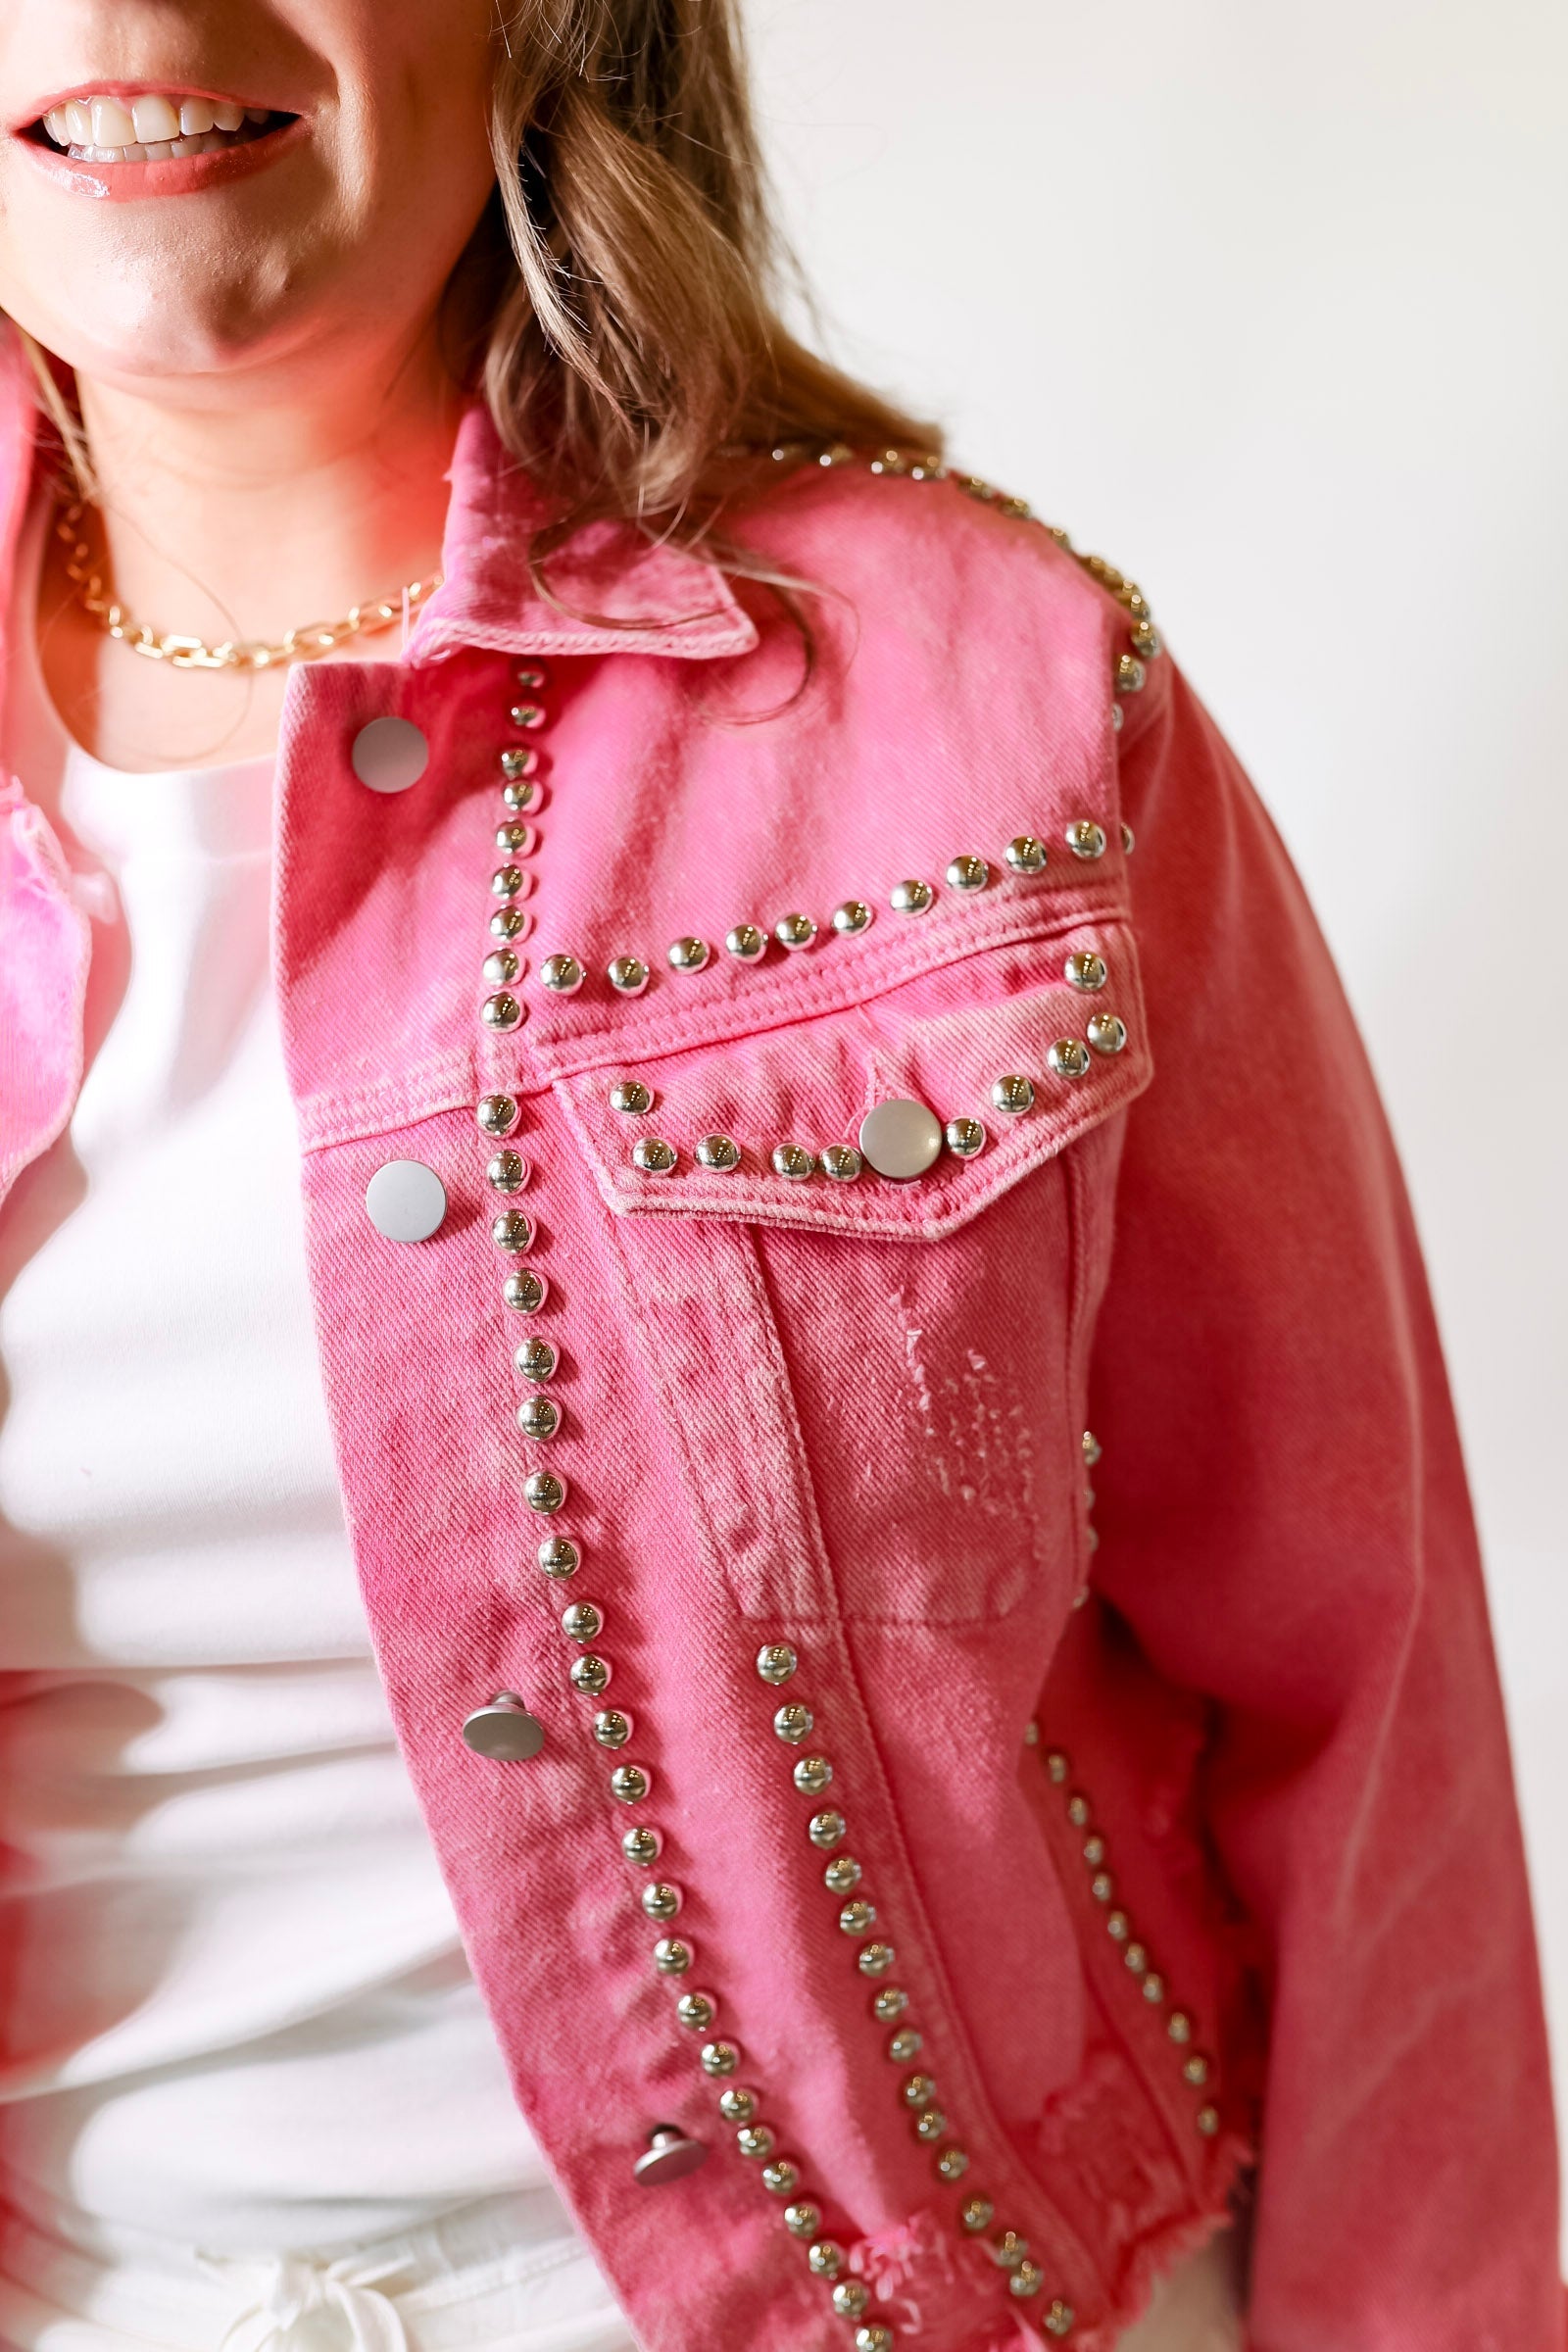 Instantly Impressed Cropped Denim Jacket with Silver Studs in Hot Pink - Giddy Up Glamour Boutique